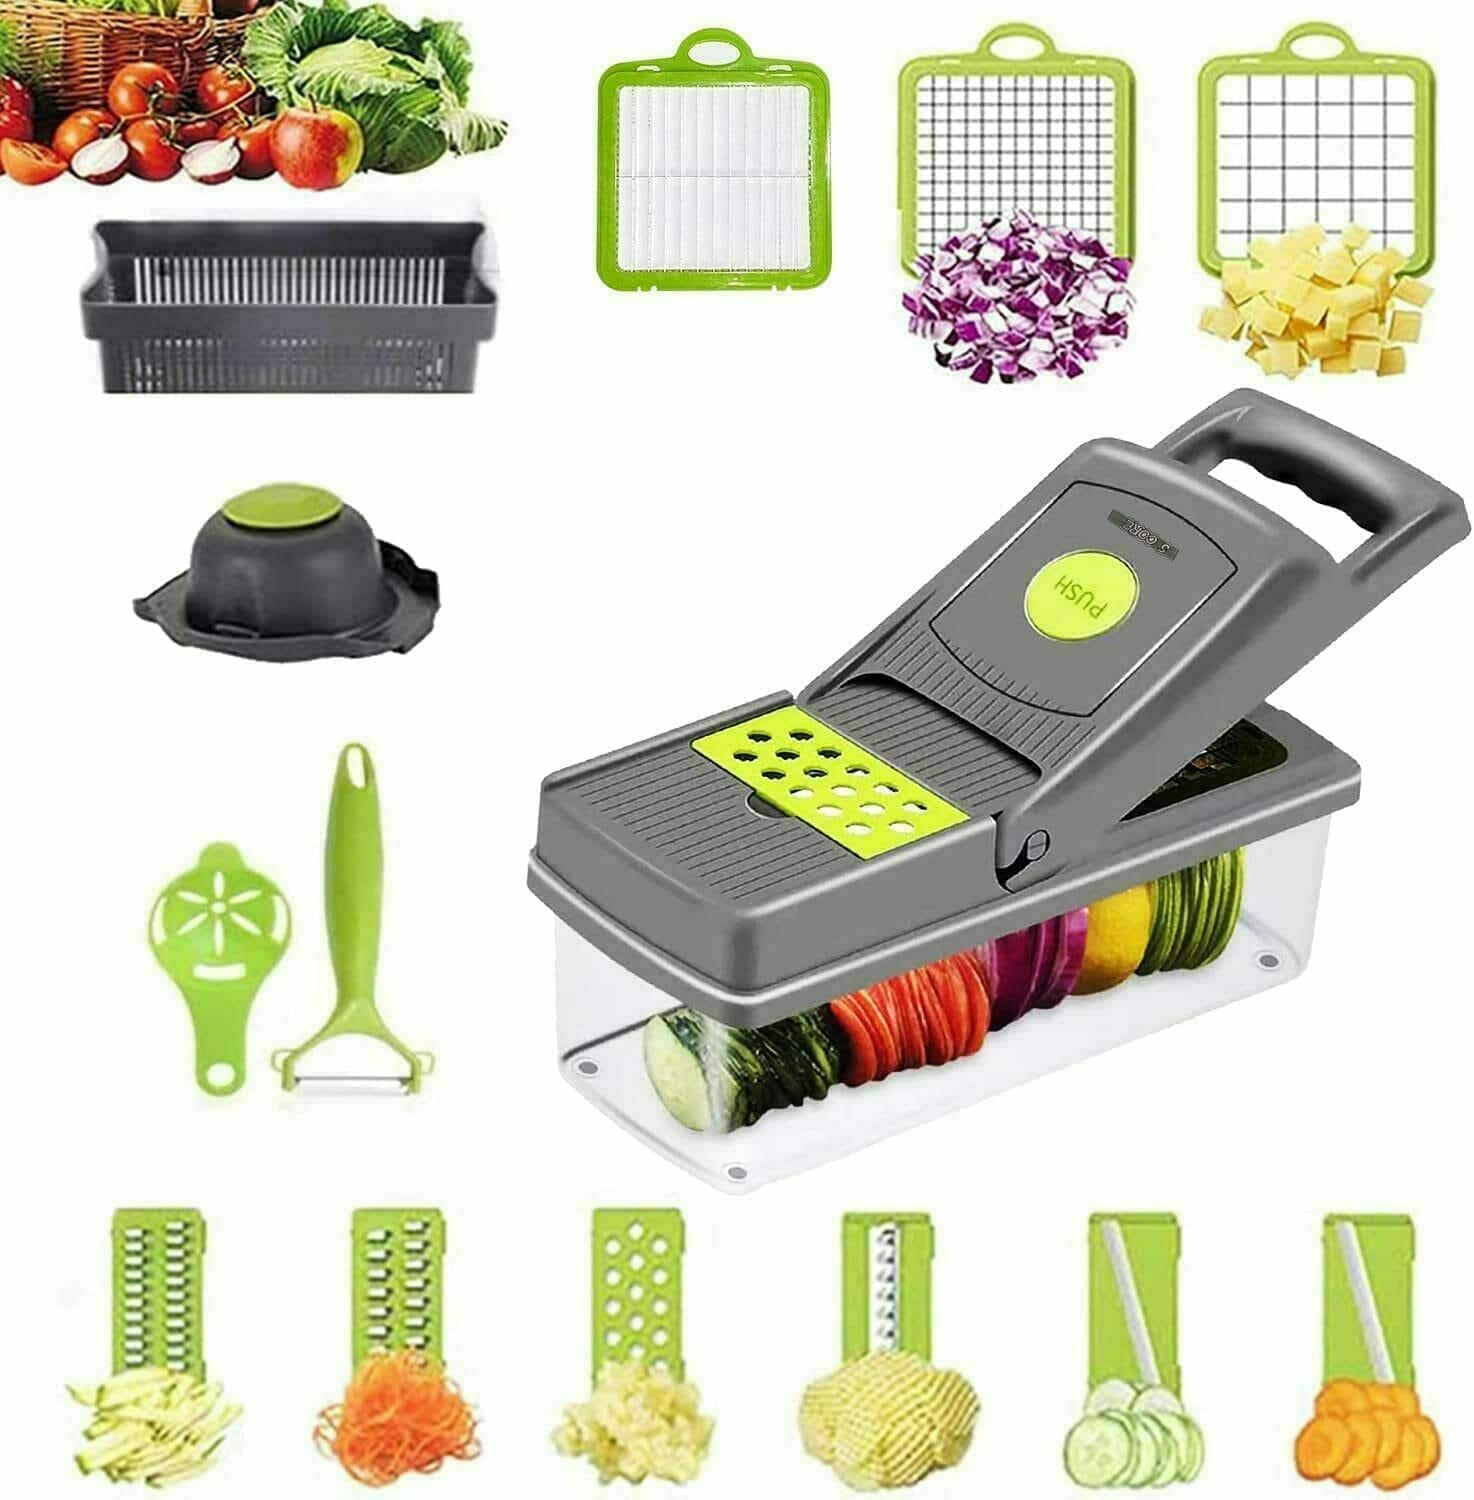 Yulhao Multi Function Veg Cutter and Slicer， with